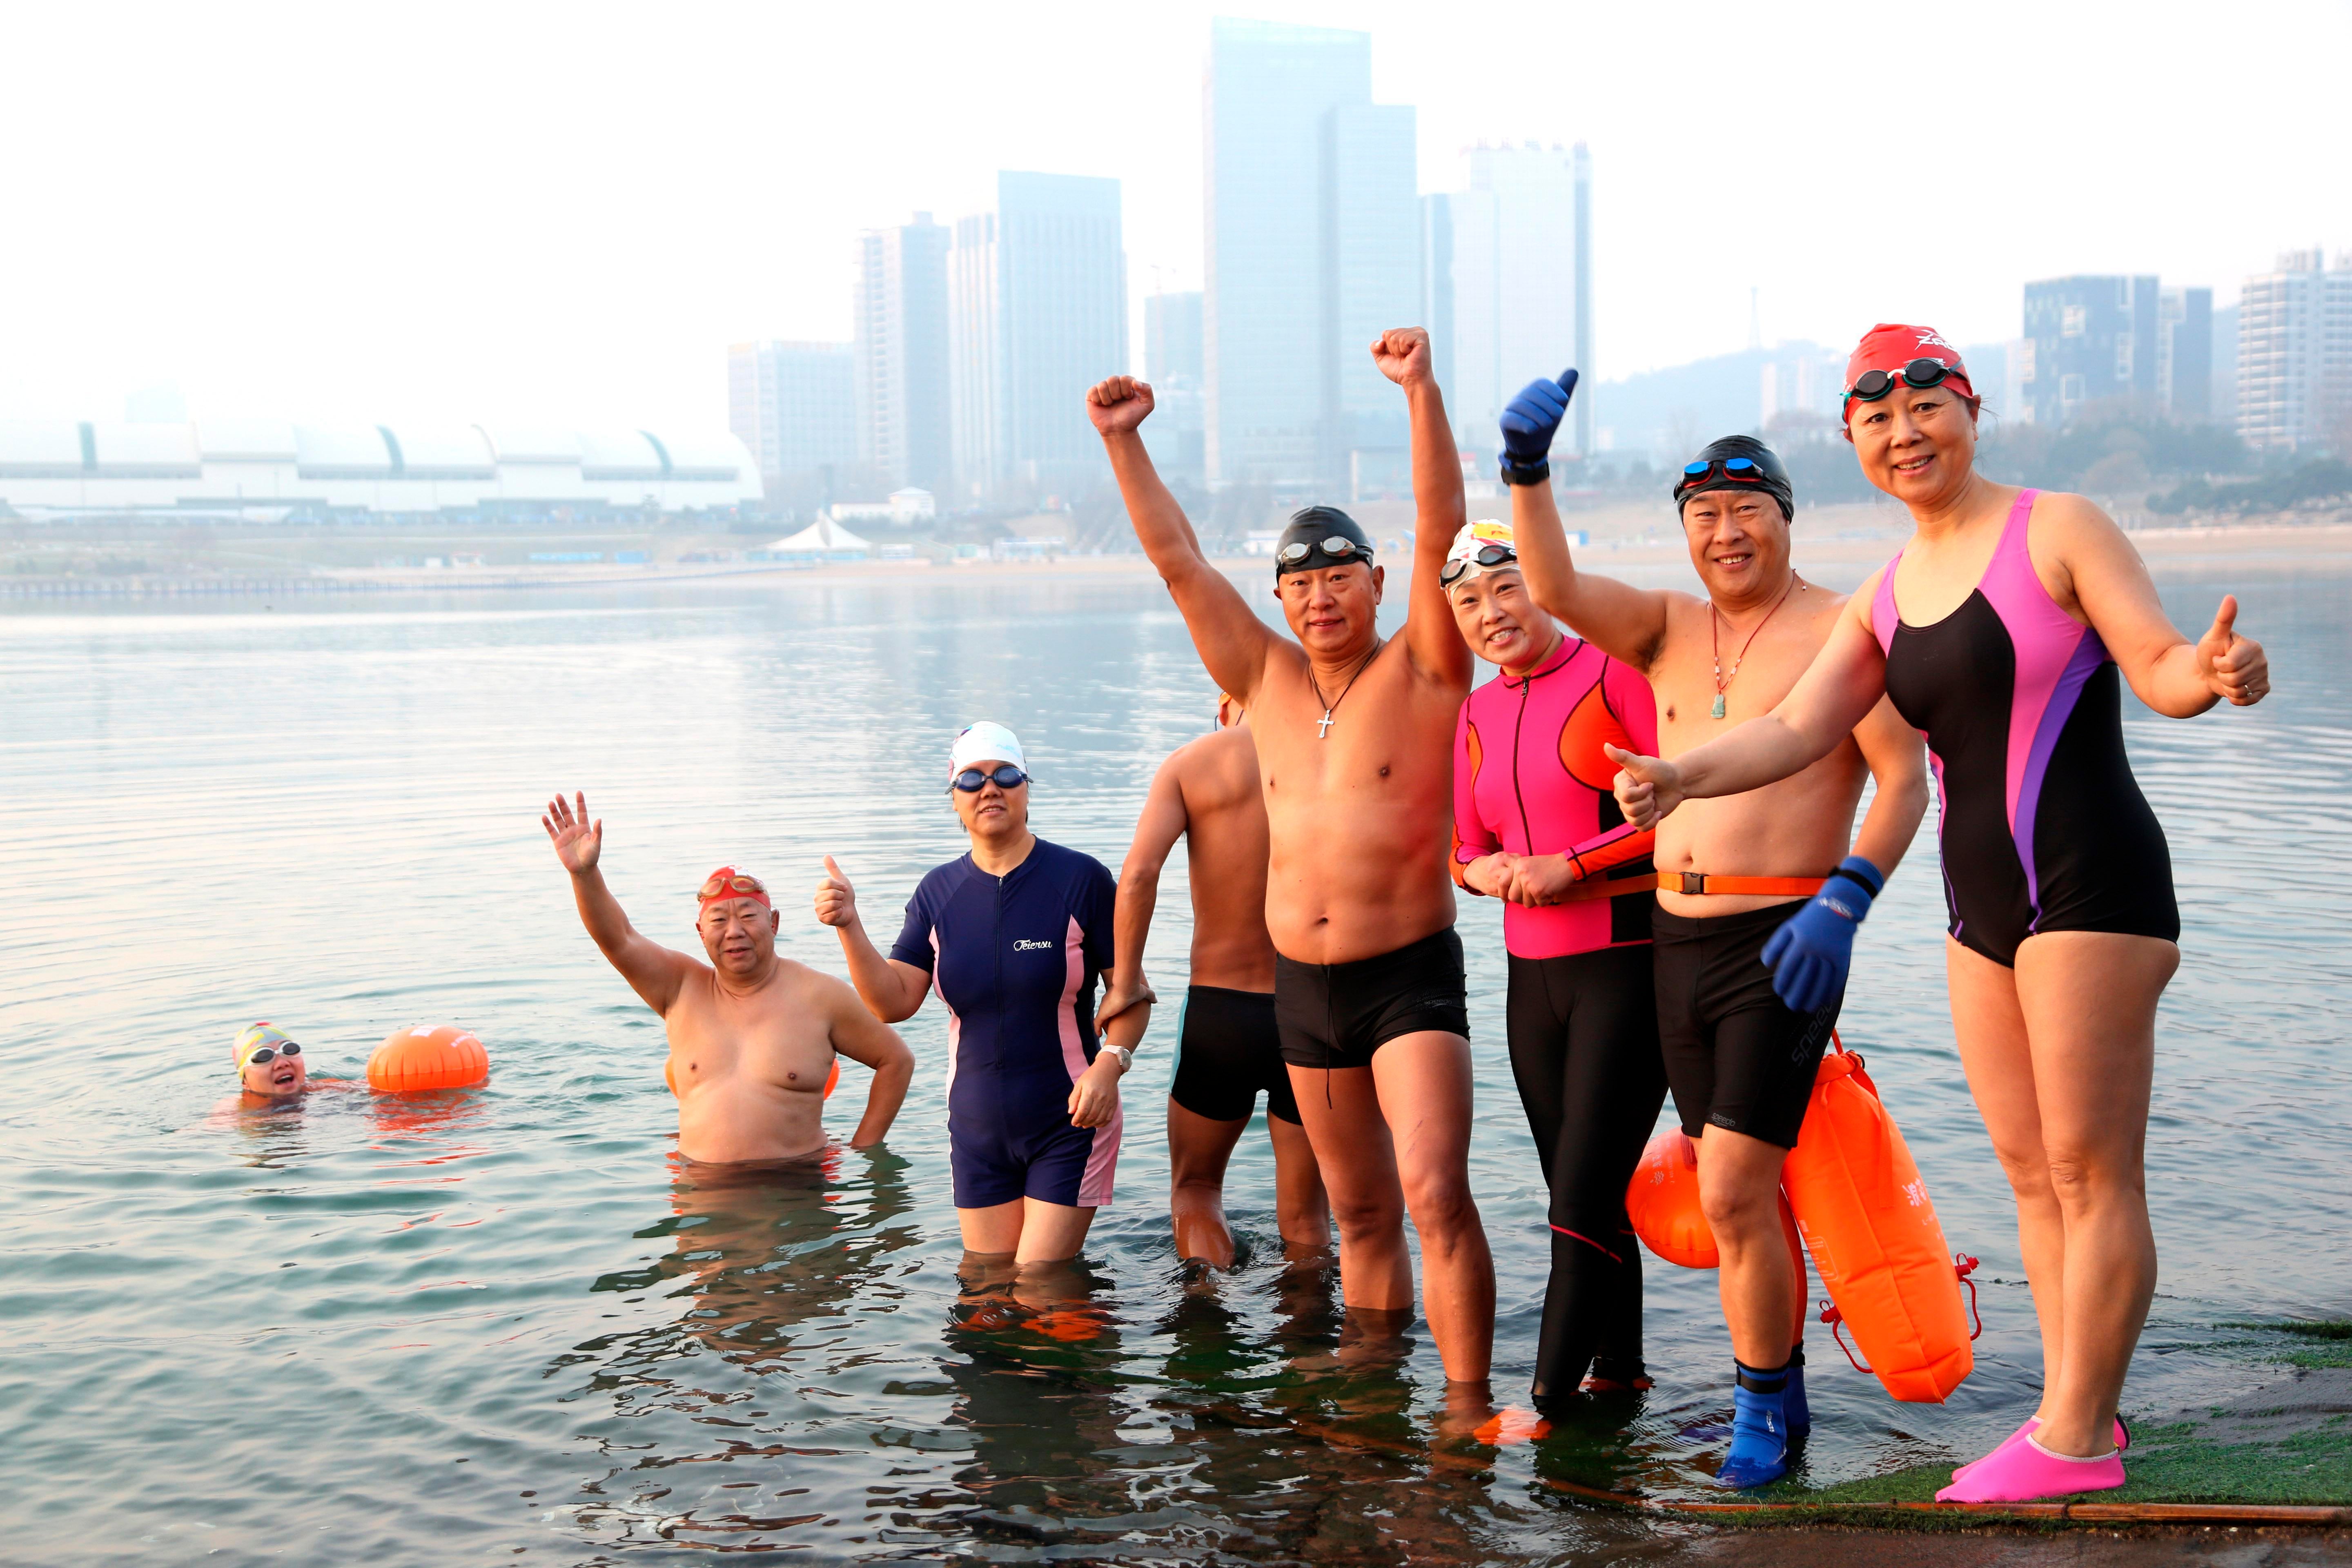 Winter swimming enthusiasts took part in the winter swimming activity at  the winter swimming base in Lianyungang City, east China's Jiangsu  Province, December 7, 2022. (Photo: Imaginechina, AP)